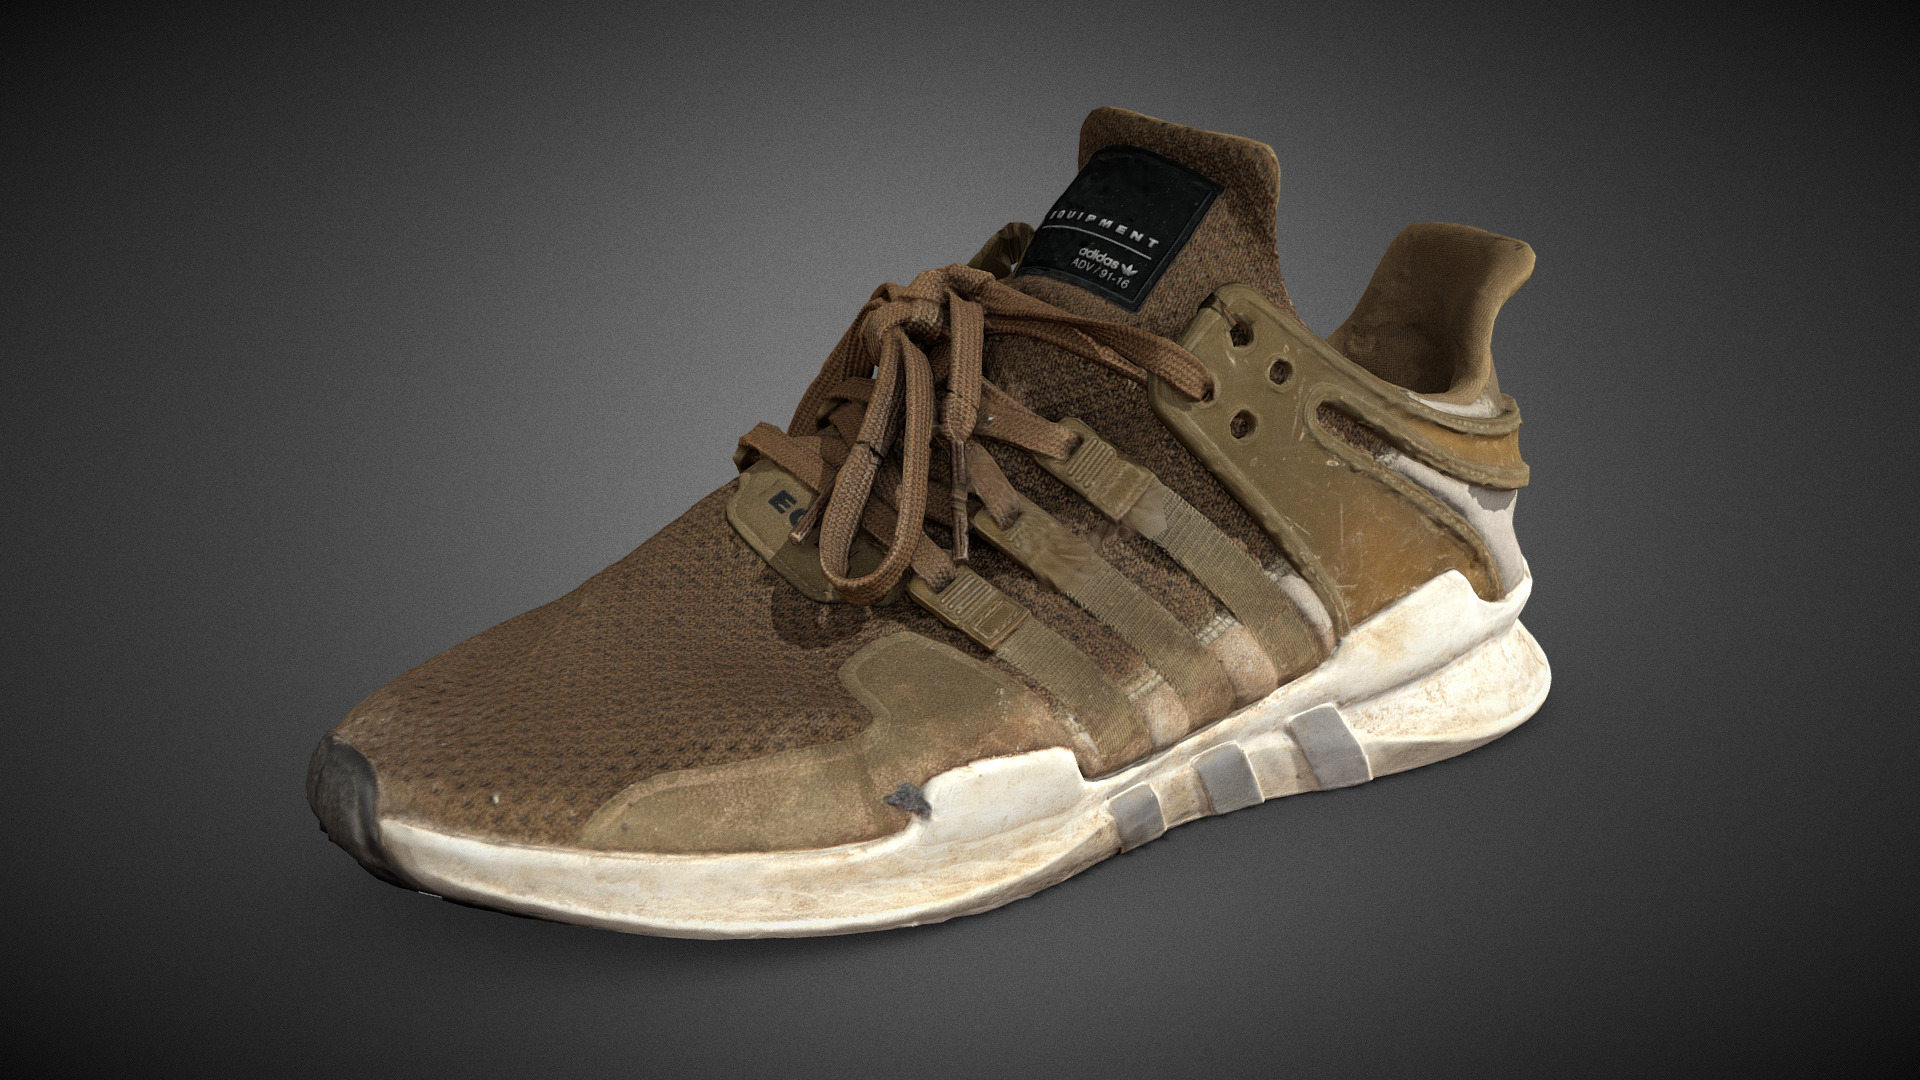 3D model Adidas EQT - This is a 3D model of the Adidas EQT. The 3D model is about a brown and black shoe.